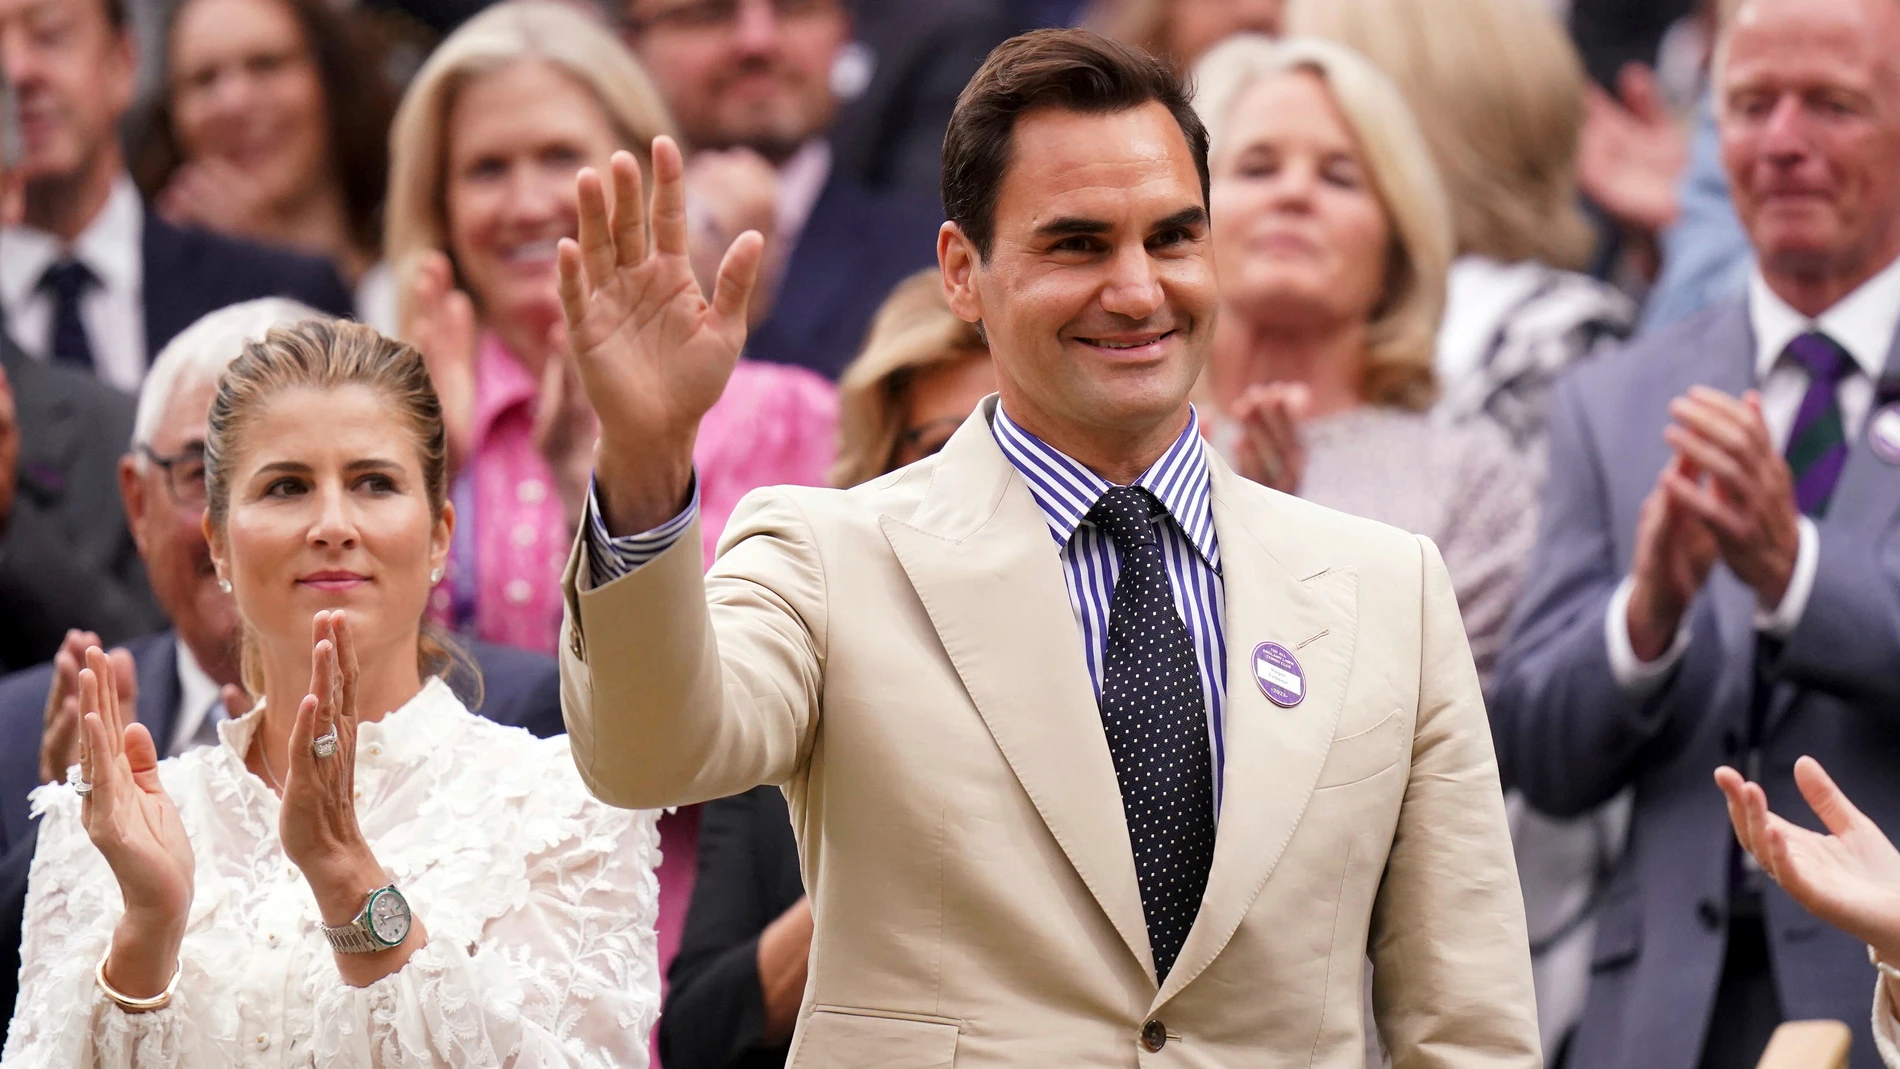 Tennis champion Roger Federer and his wife Mirka, left, stand in the royal box on day two of the Wimbledon tennis championships in London, Tuesday, July 4, 2023. (Adam Davy/PA via AP)